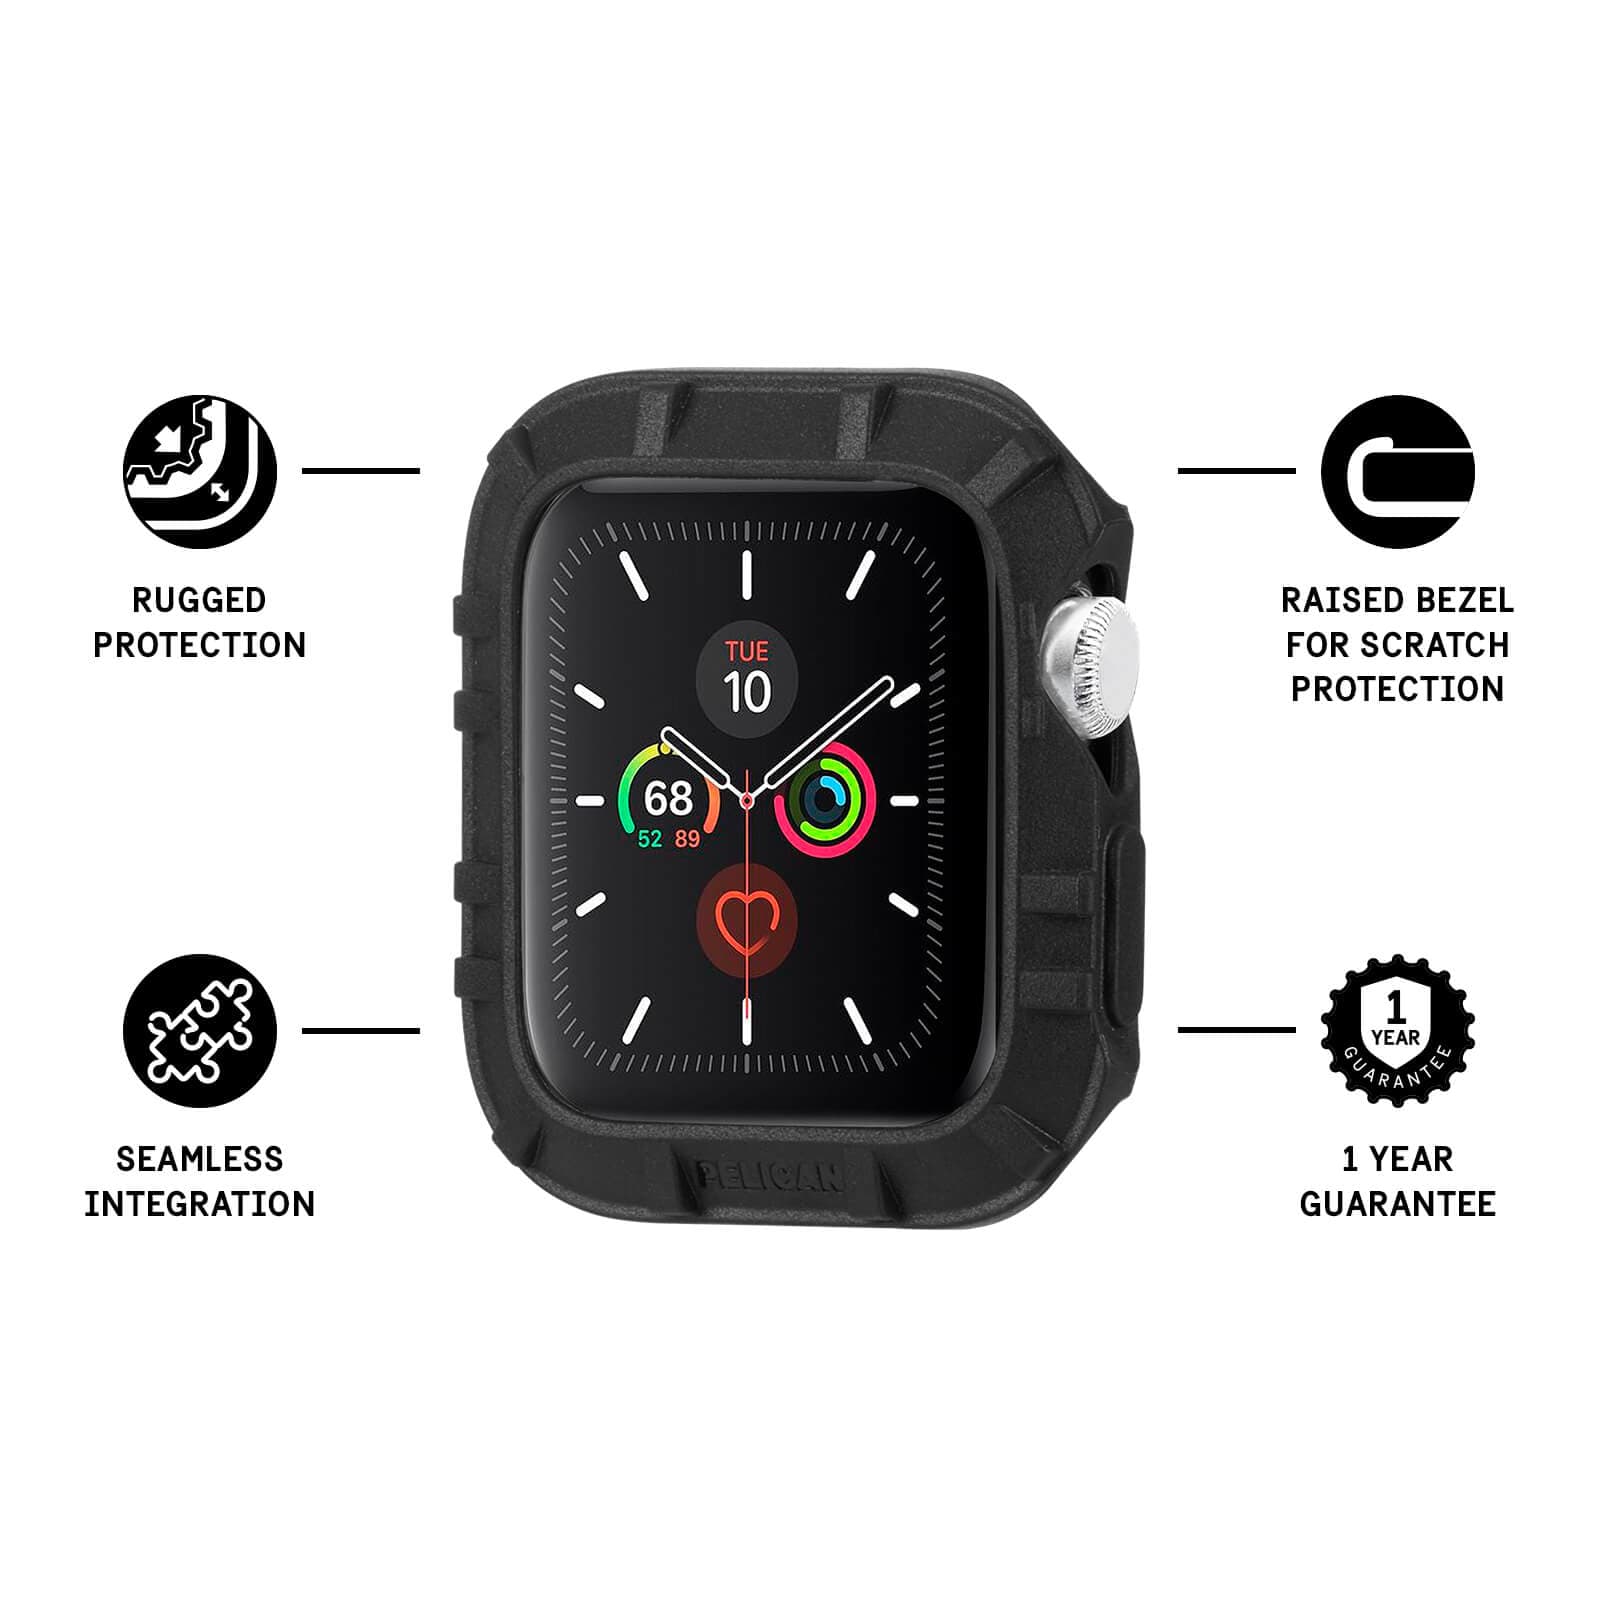 Features Rugged Protection, Seamless Integration, Raised Bezel for Scratch Protection, 1 year guarantee. color::Black